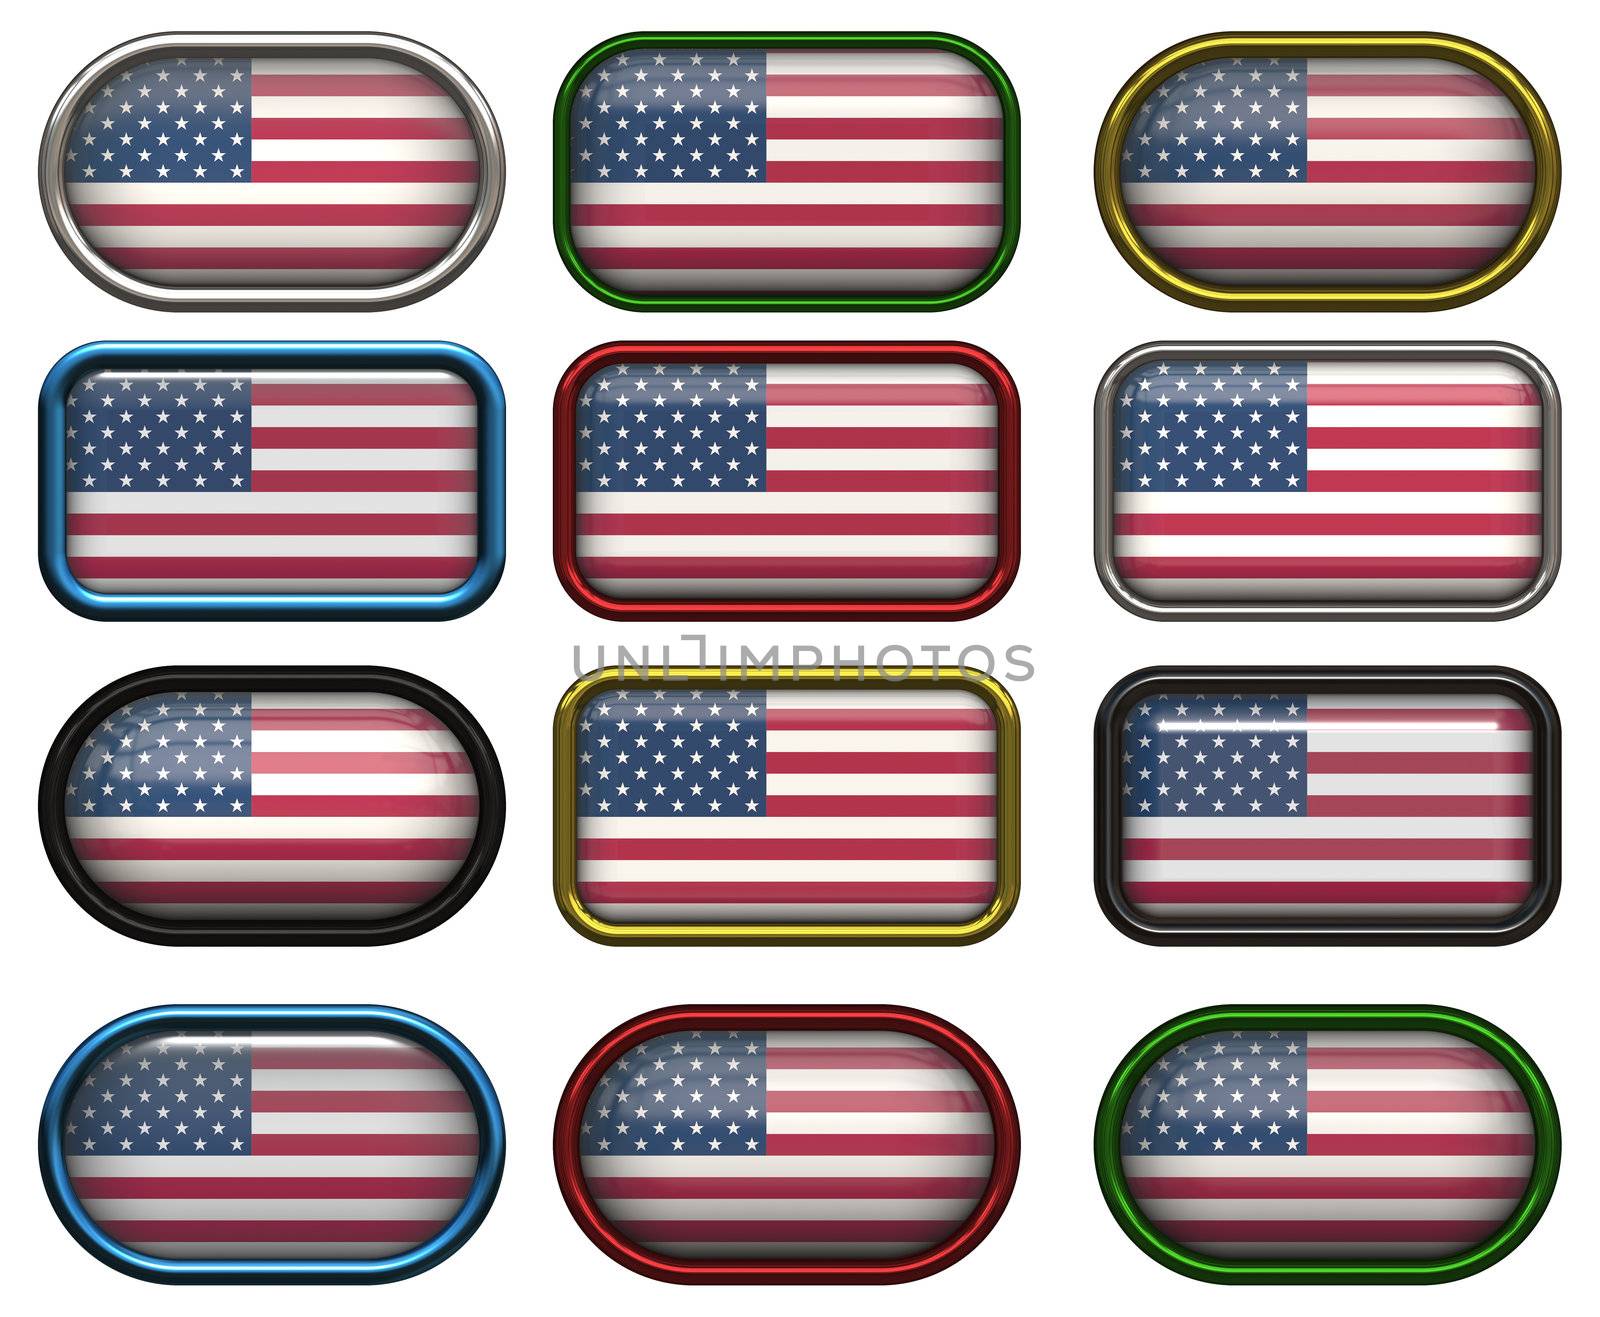 twelve Great buttons of the Flag of the United States